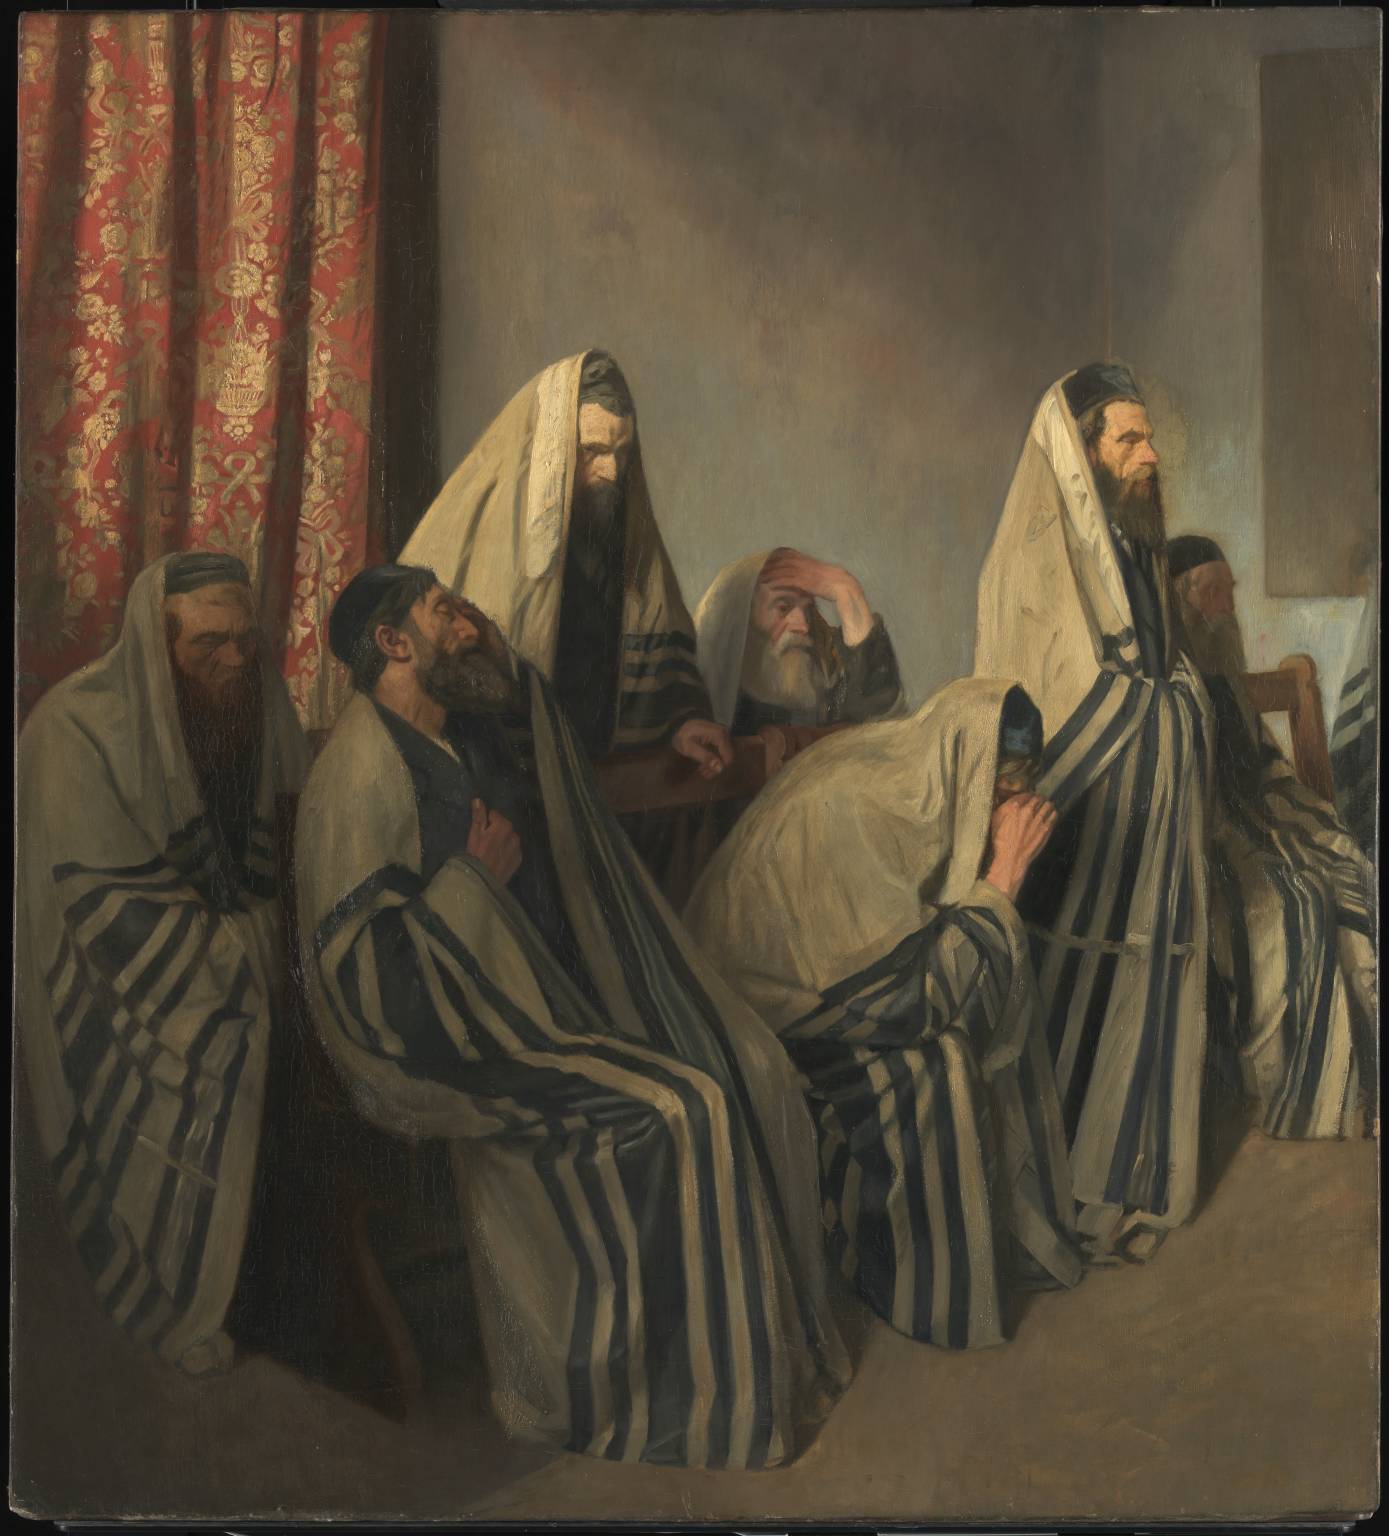 Jews Mourning in a Synagogue 1906 by Sir William Rothenstein 1872-1945